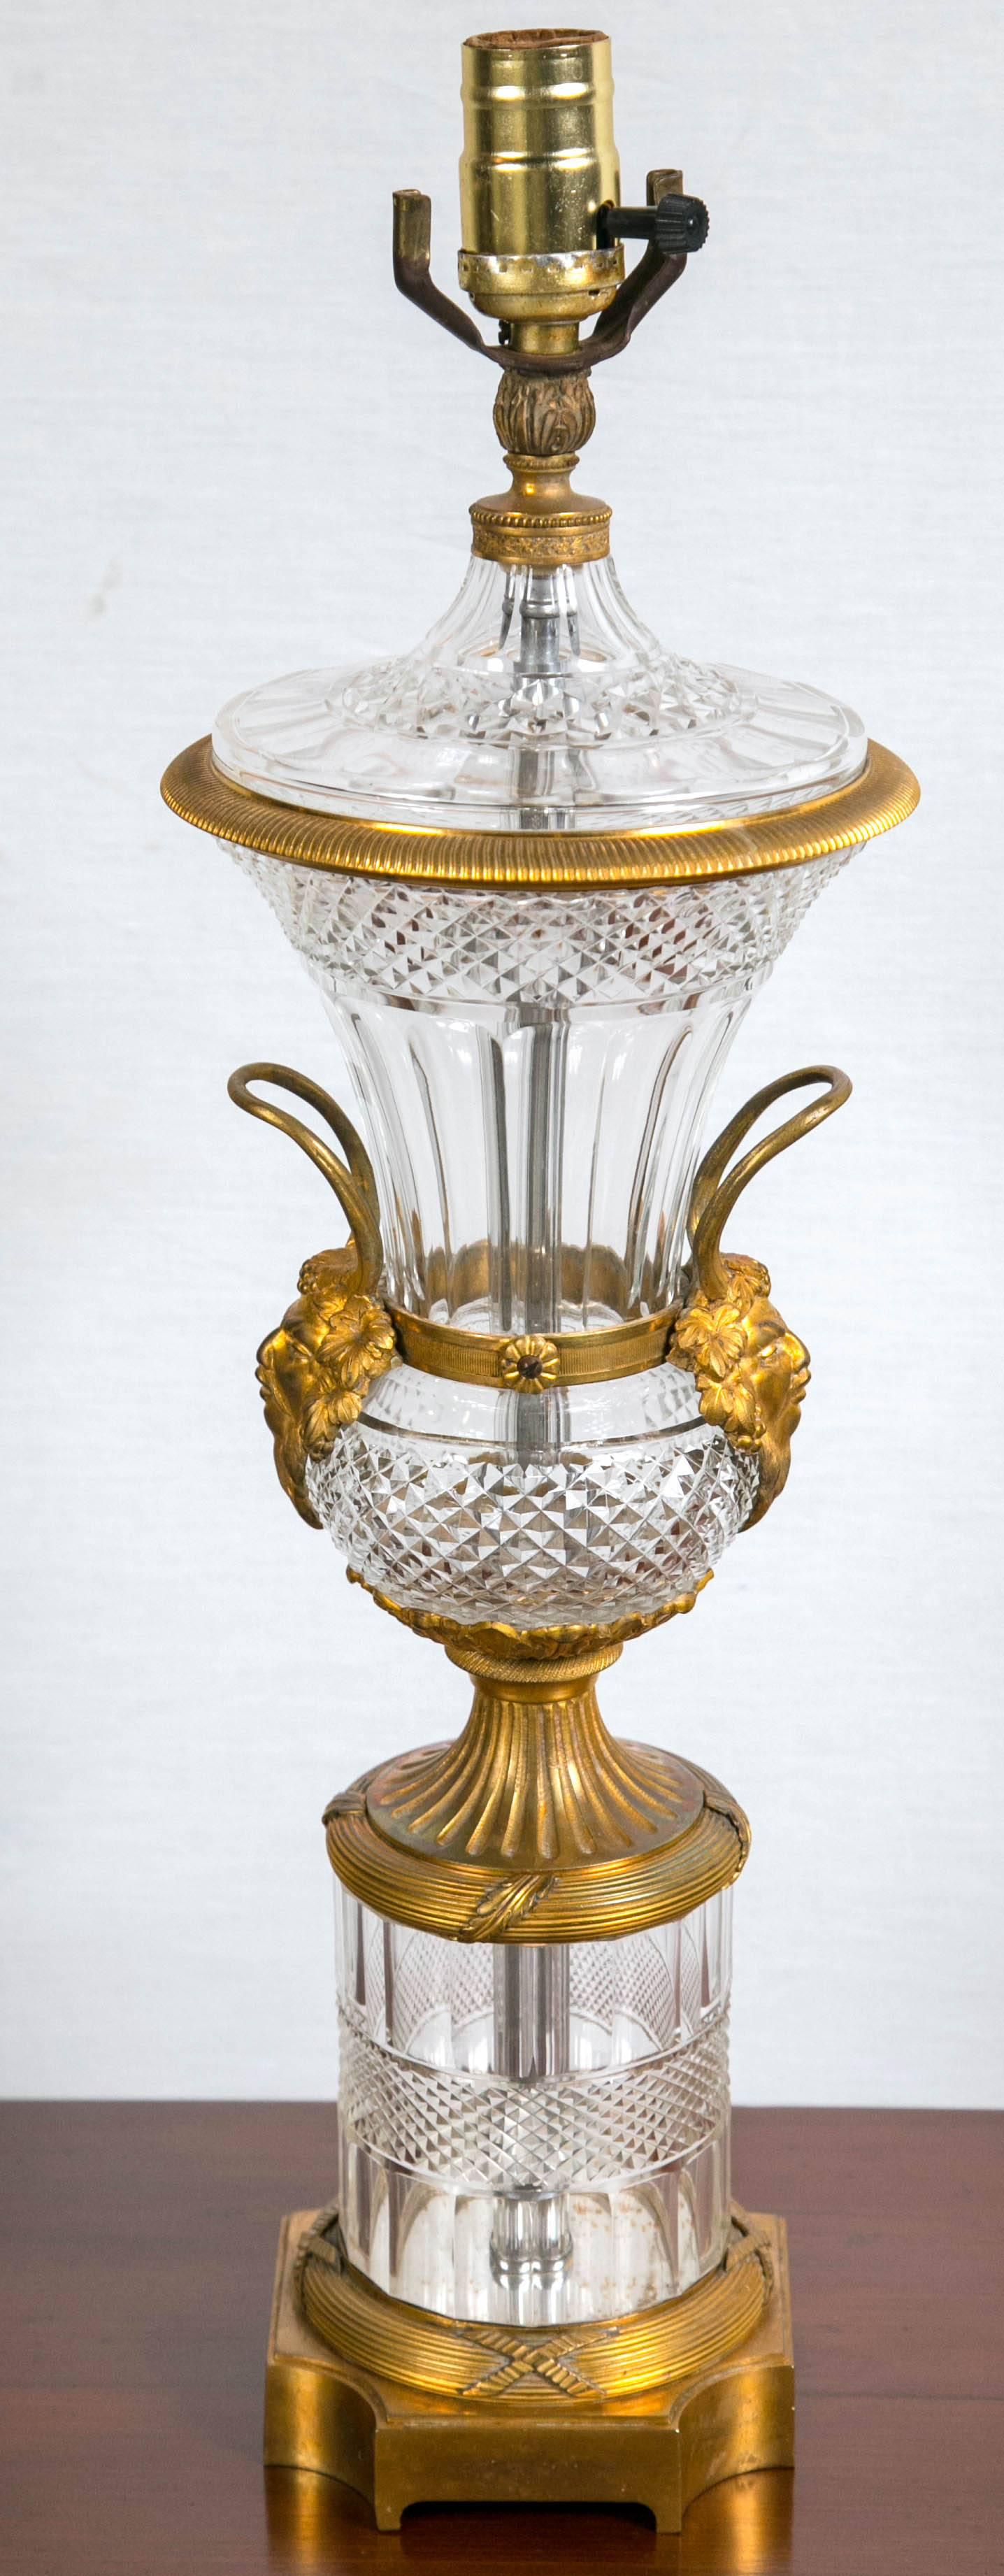 Beautiful pair of Baccarat crystal lamps with gilt bronze mounts.
 